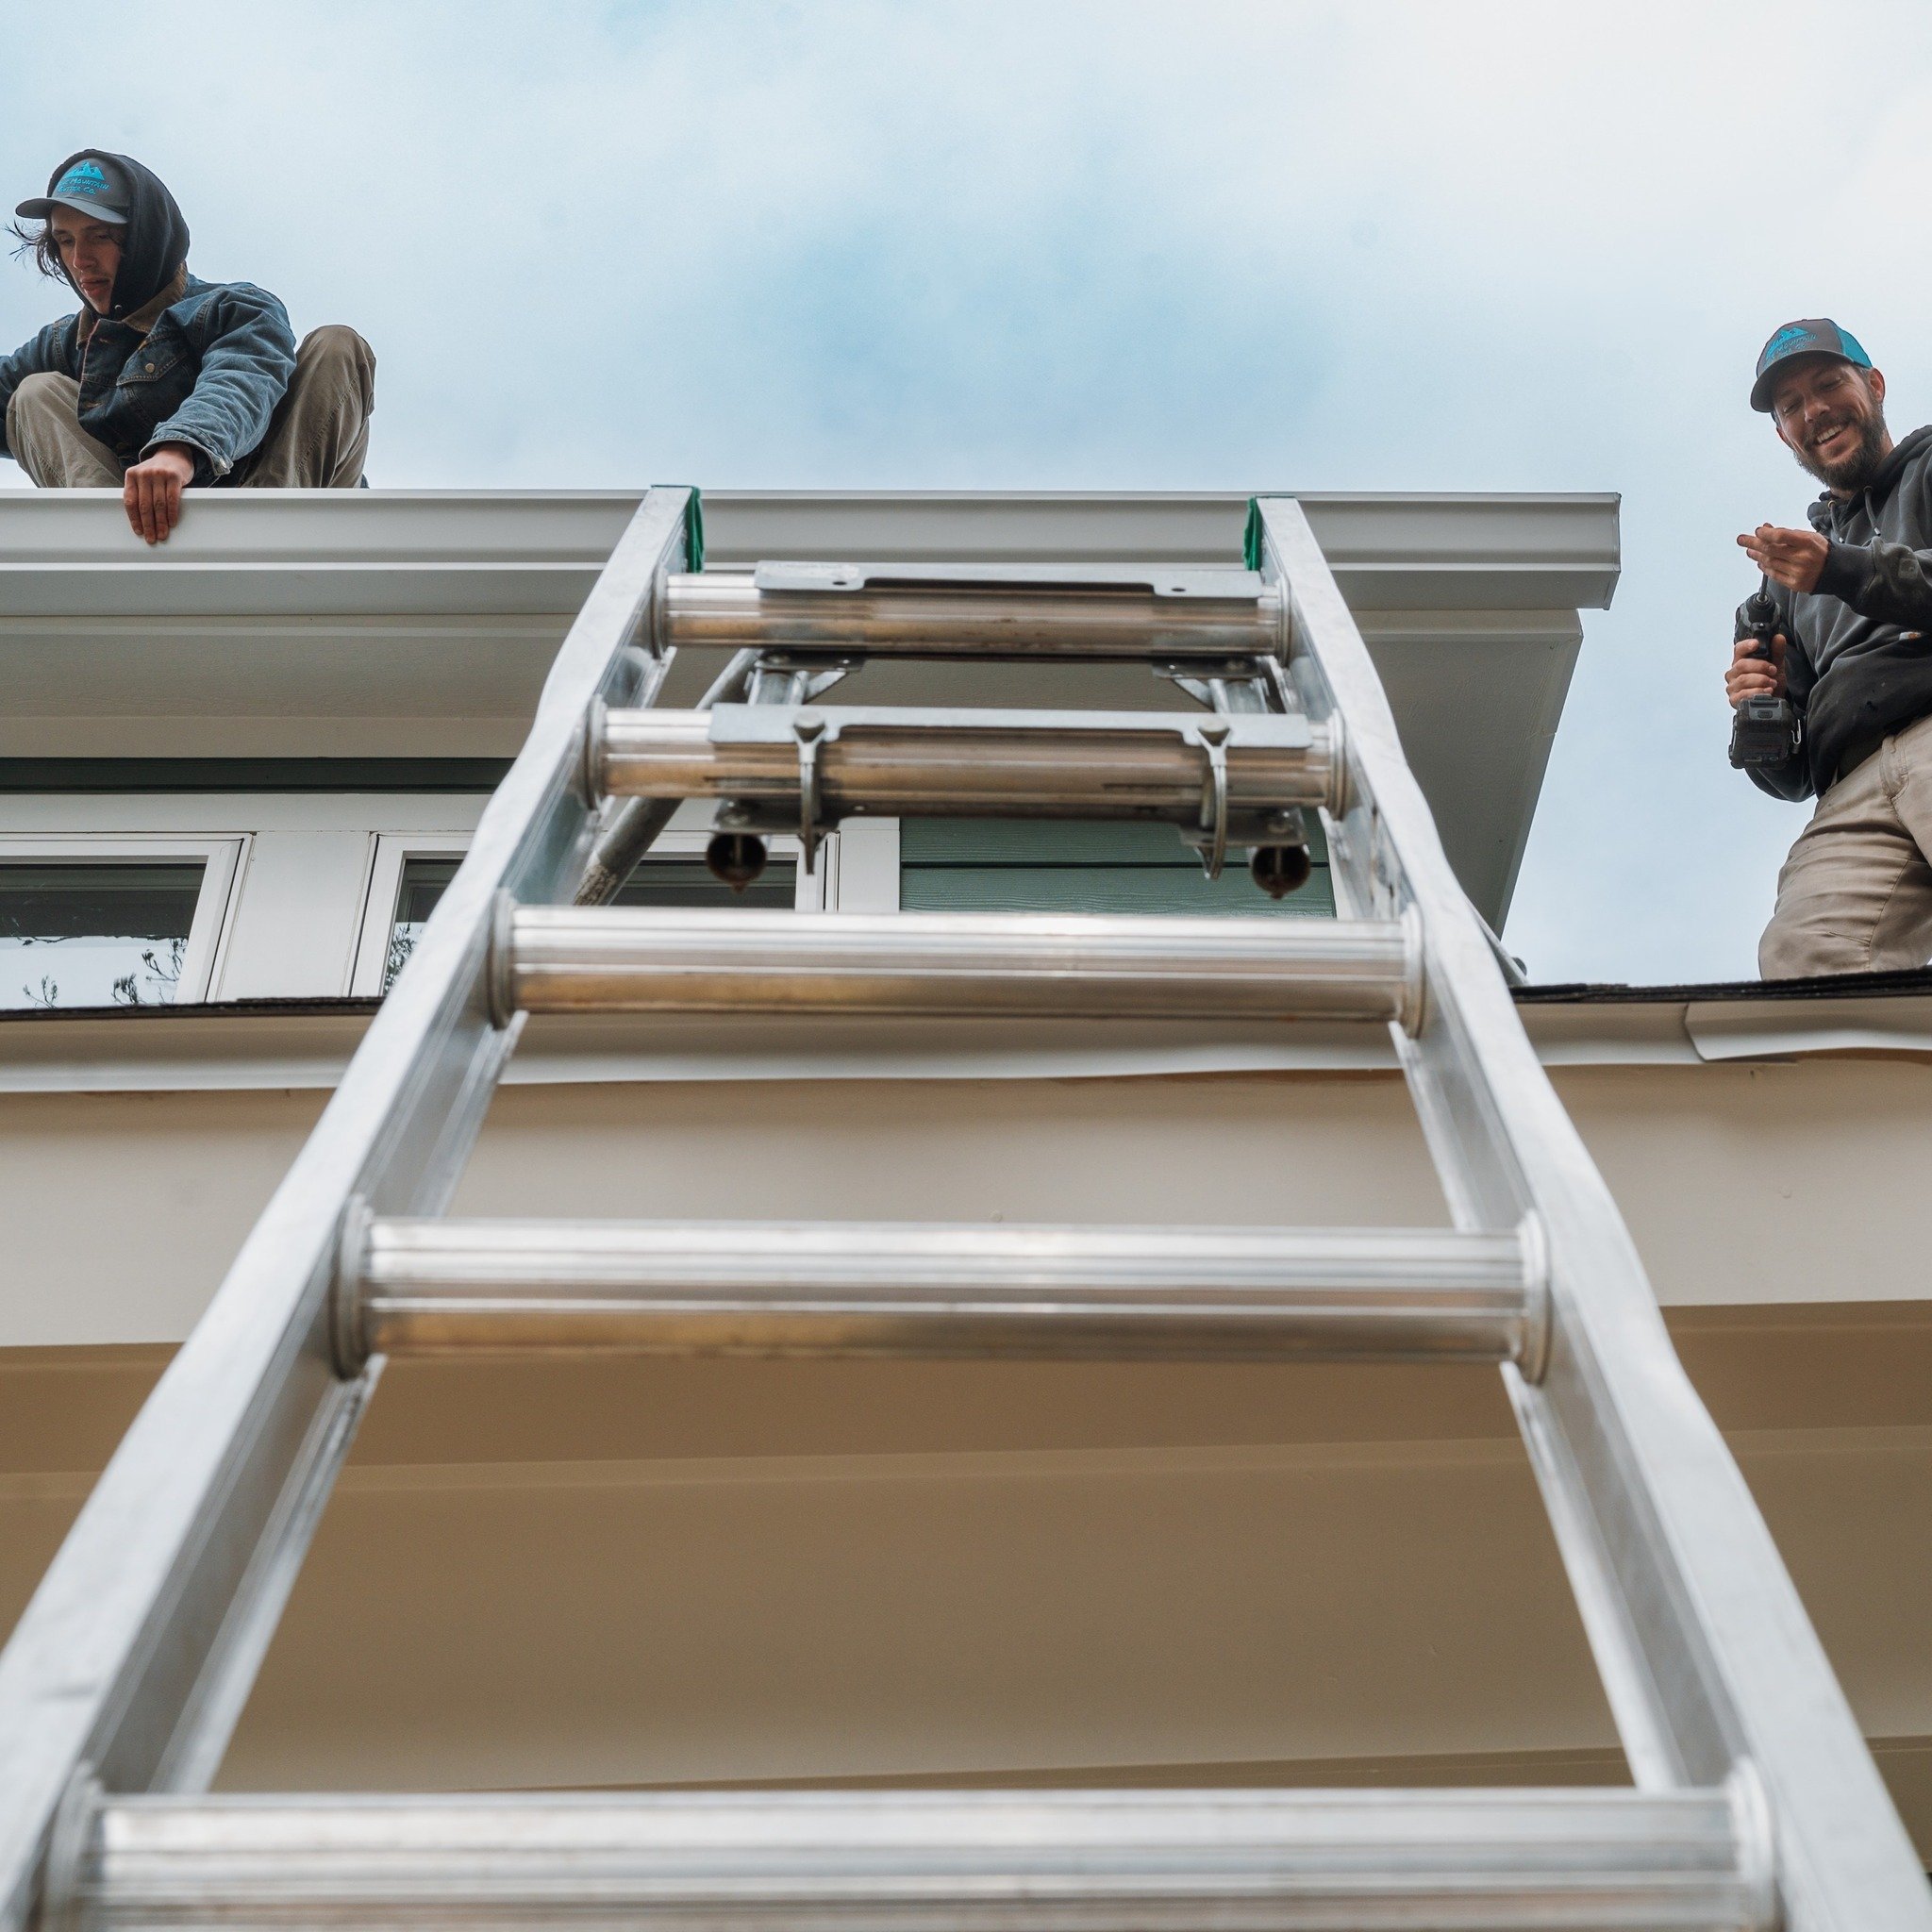 Climbing ladders and working on the roof is dangerous. That&rsquo;s why our company is fully ensured, including both worker&rsquo;s compensation and liability, to protect both you and our team. 

(828)390-0243

www.bluemountaingutterco.com

#safetyfi